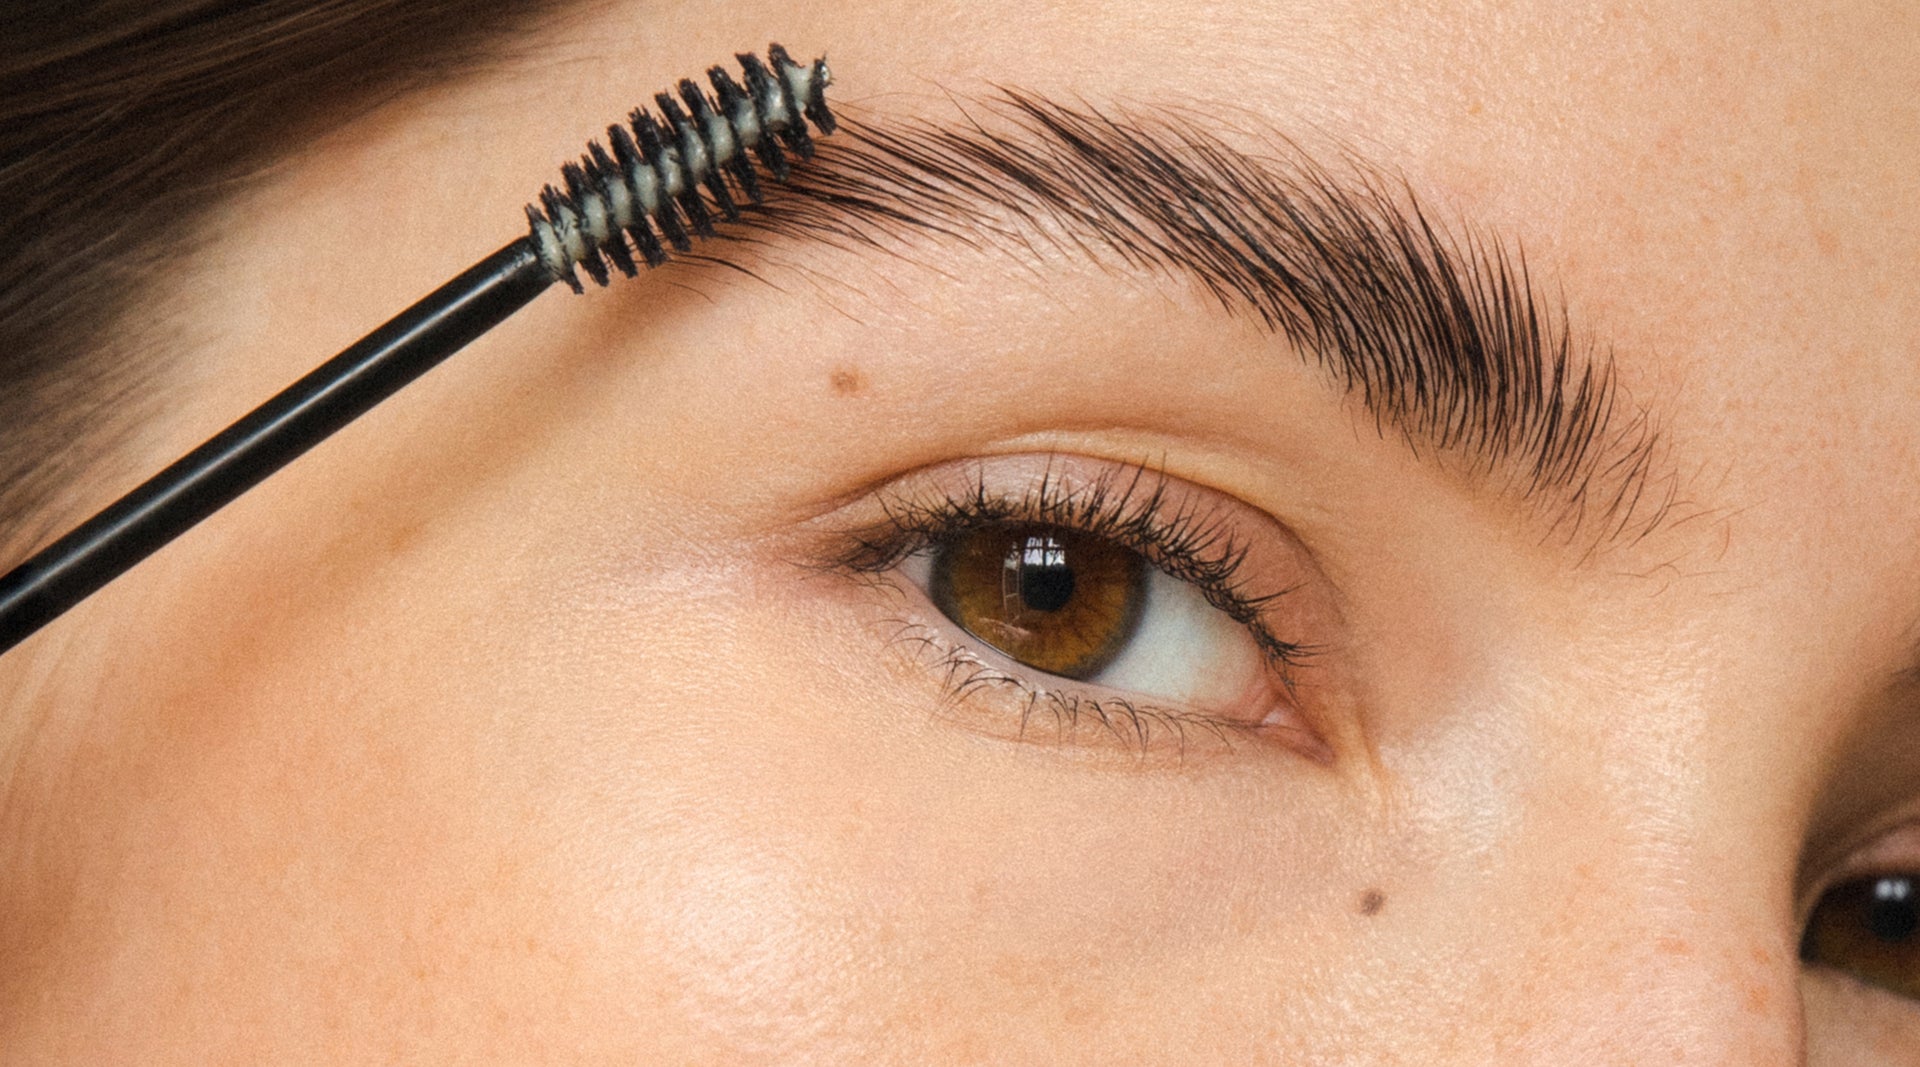 Do Eyebrows Grow Back? Here’s What A Derm Has to Say